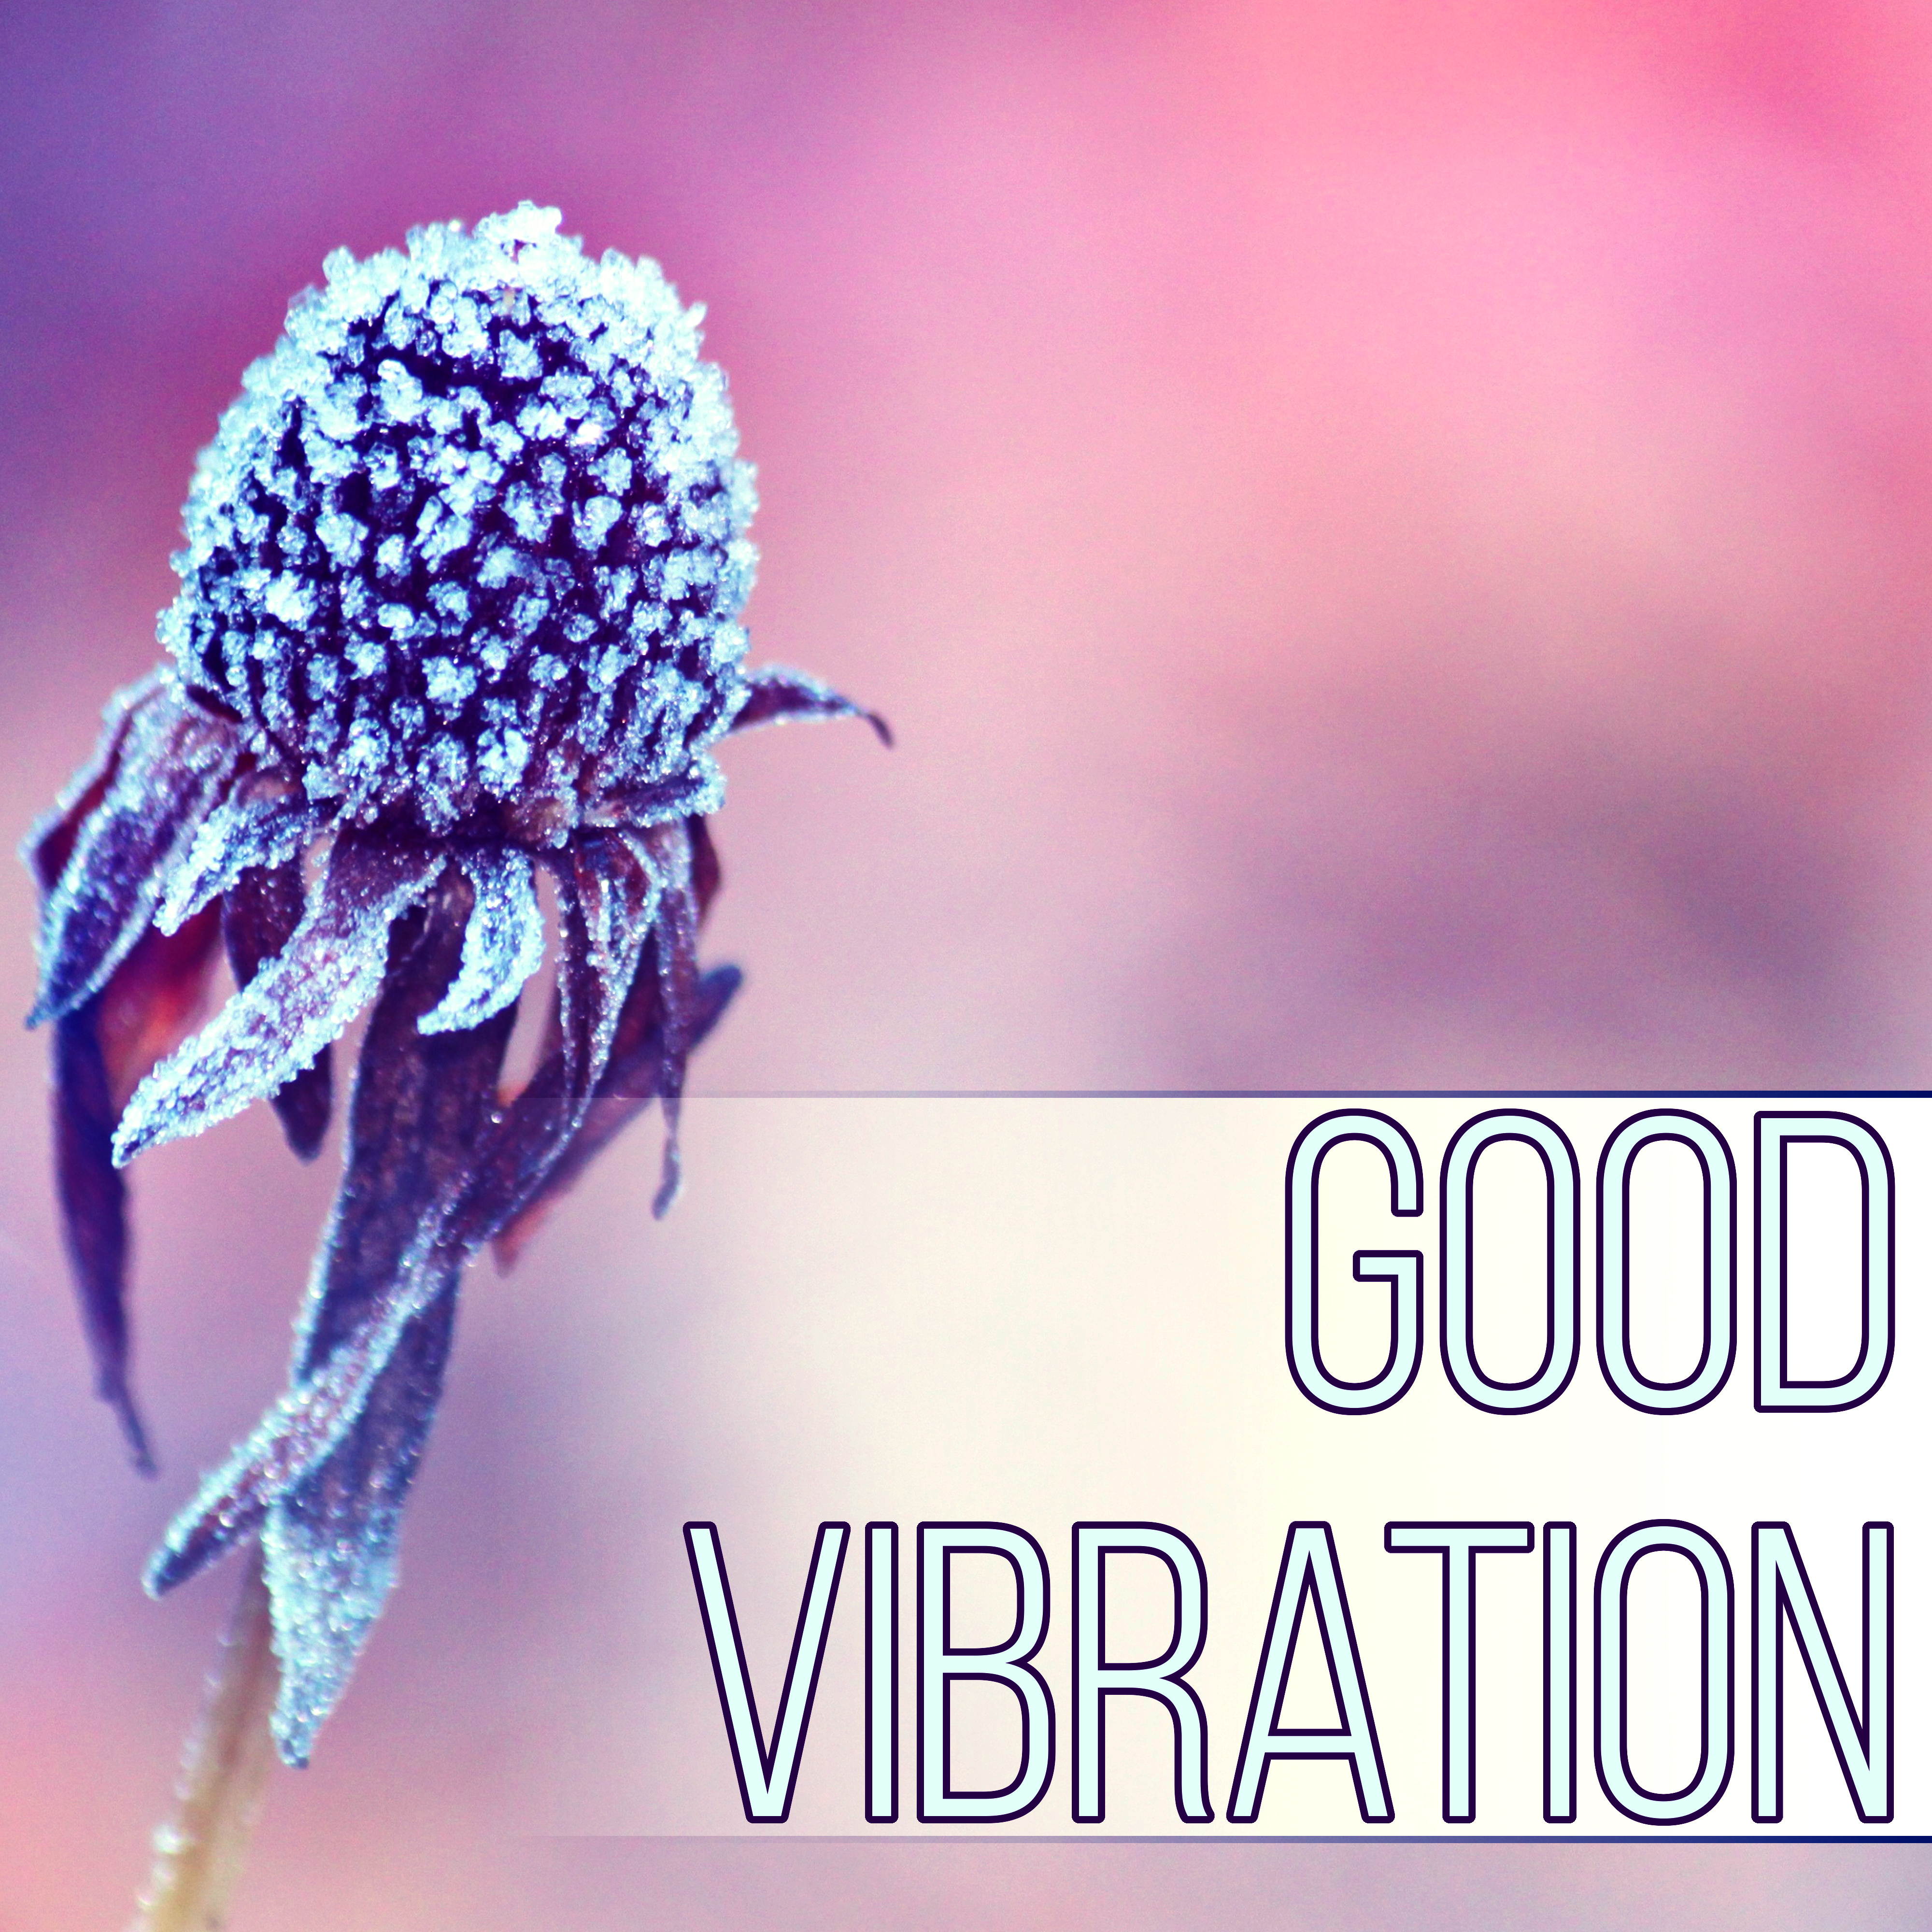 Good Vibrations  New Age Music for Beauty Salon and Spa, Relaxation, Massage, Acupressure, Aromatherapy, Beautiful and Healthy Body, Healing Power, Well Being, Rest After Work with Nature Sounds